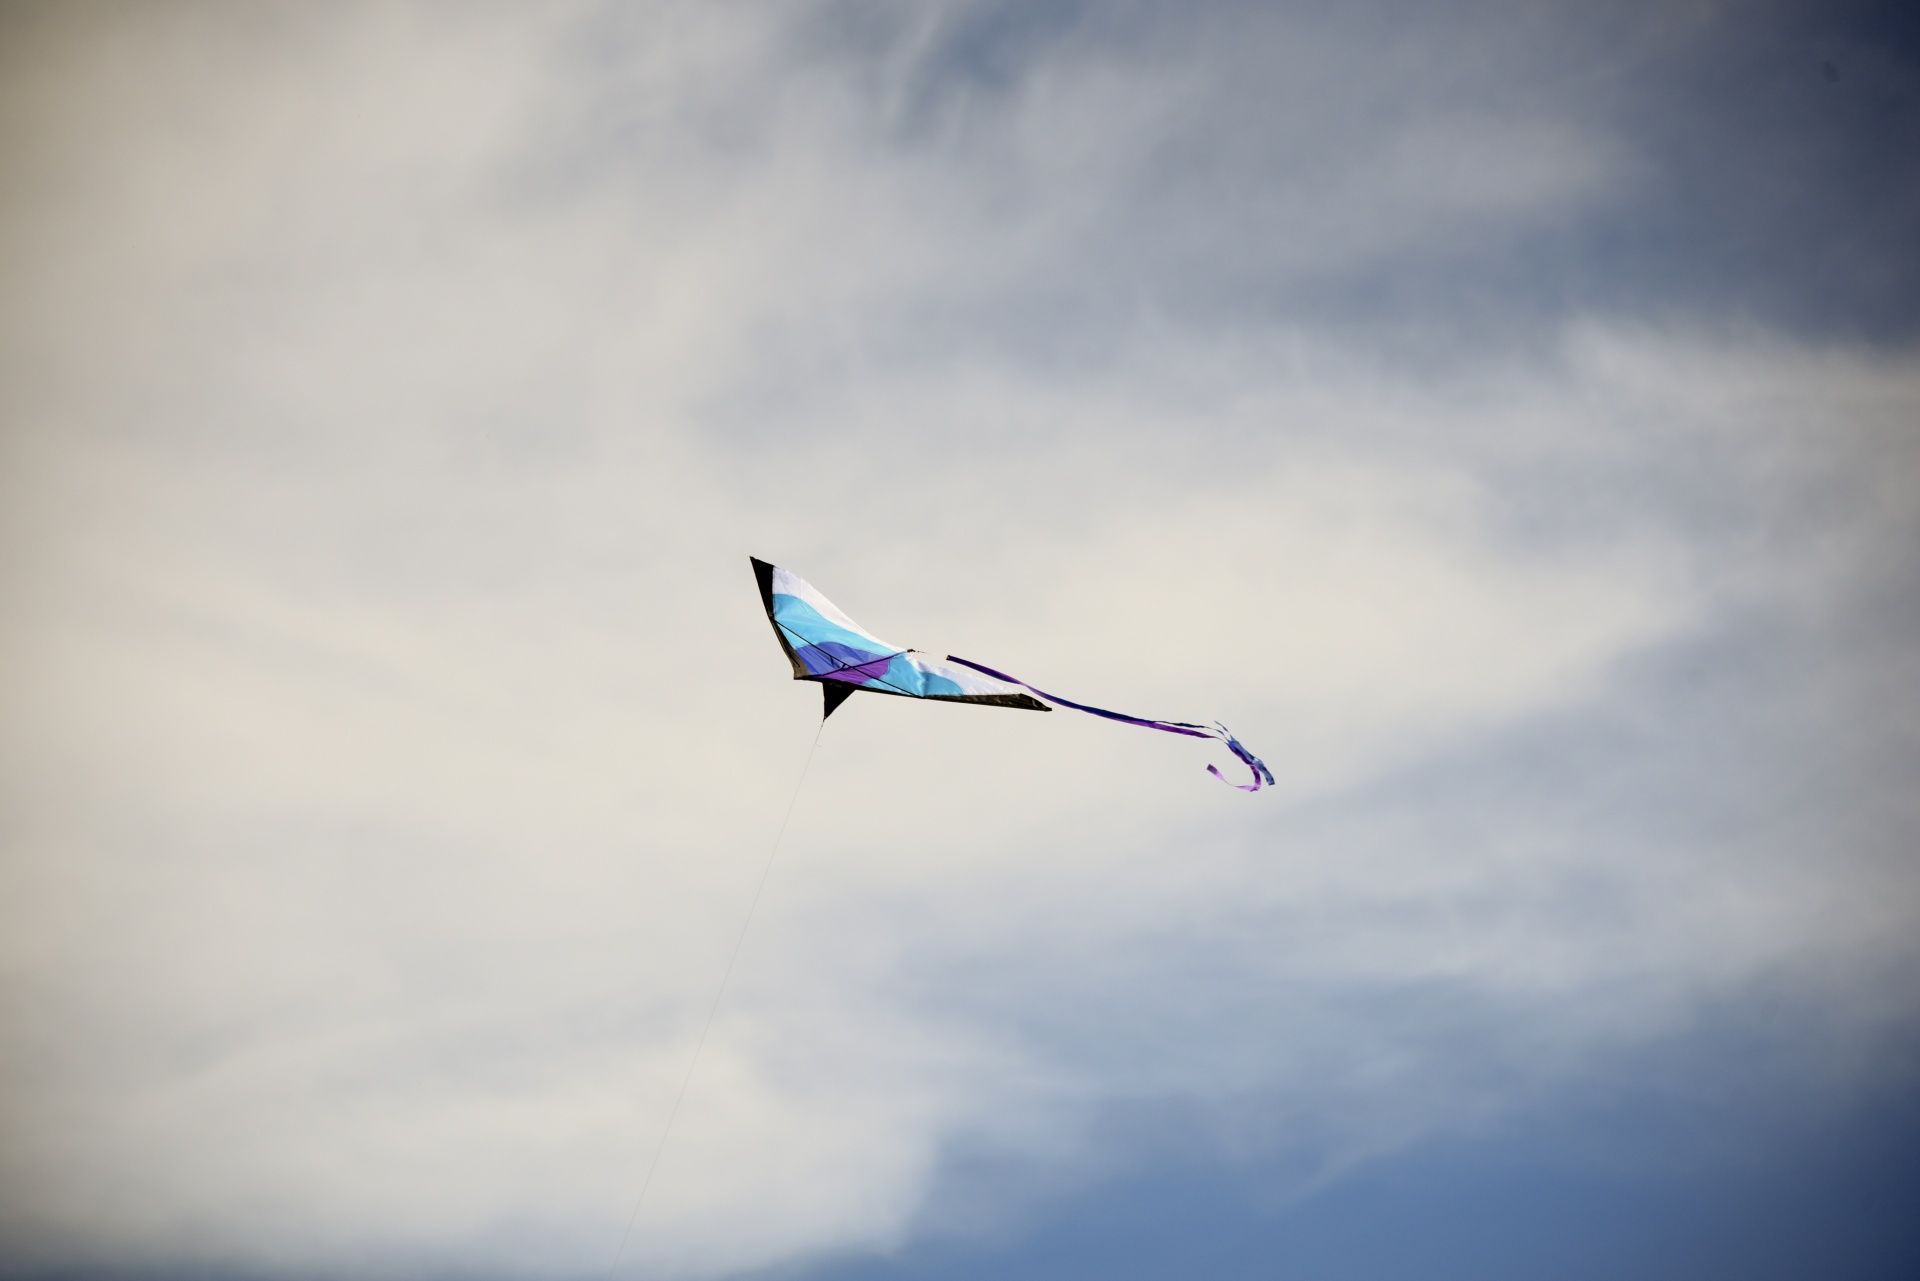 kite,clouds,sky,blue,kite in the clouds,free pictures, free photos, free images, royalty free, free illustrations, public domain